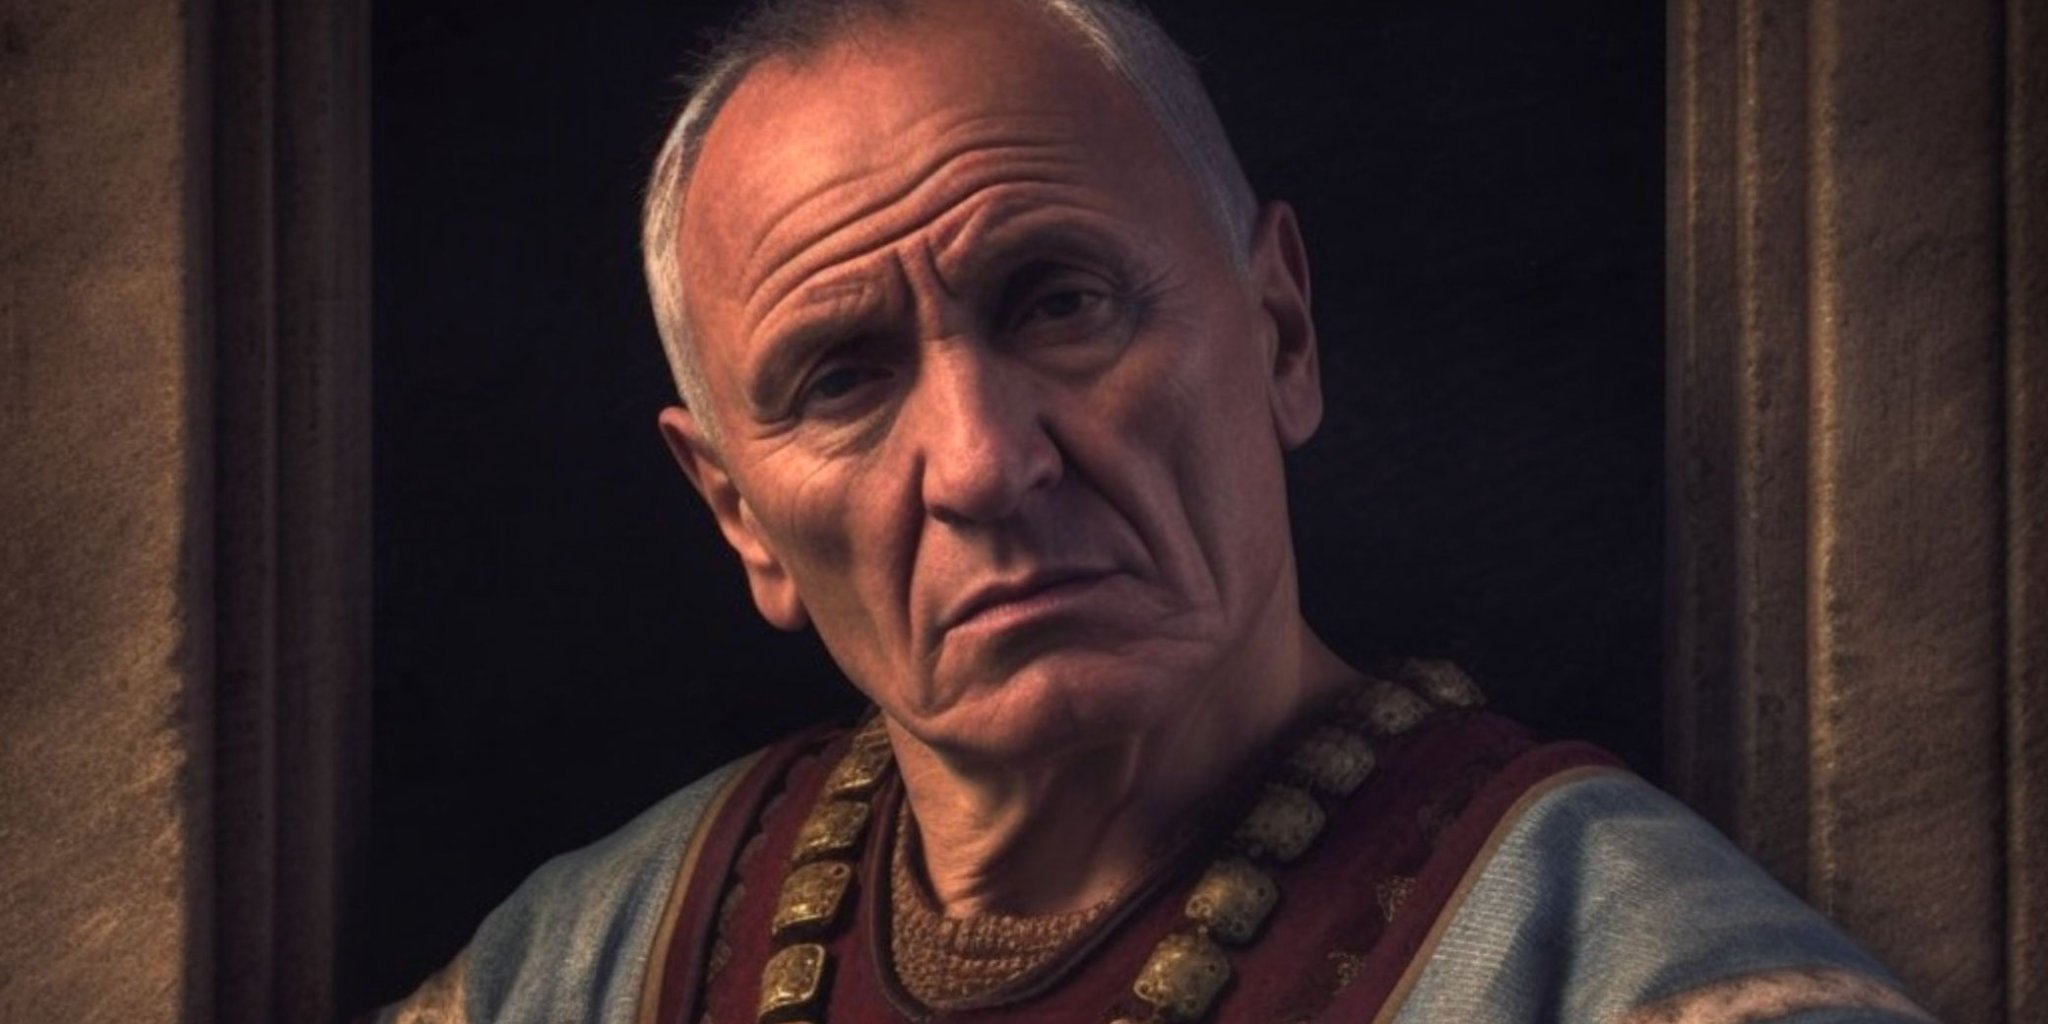 Marcus Tullius Cicero: the Roman who spoke passionately against tyrants and was killed for it